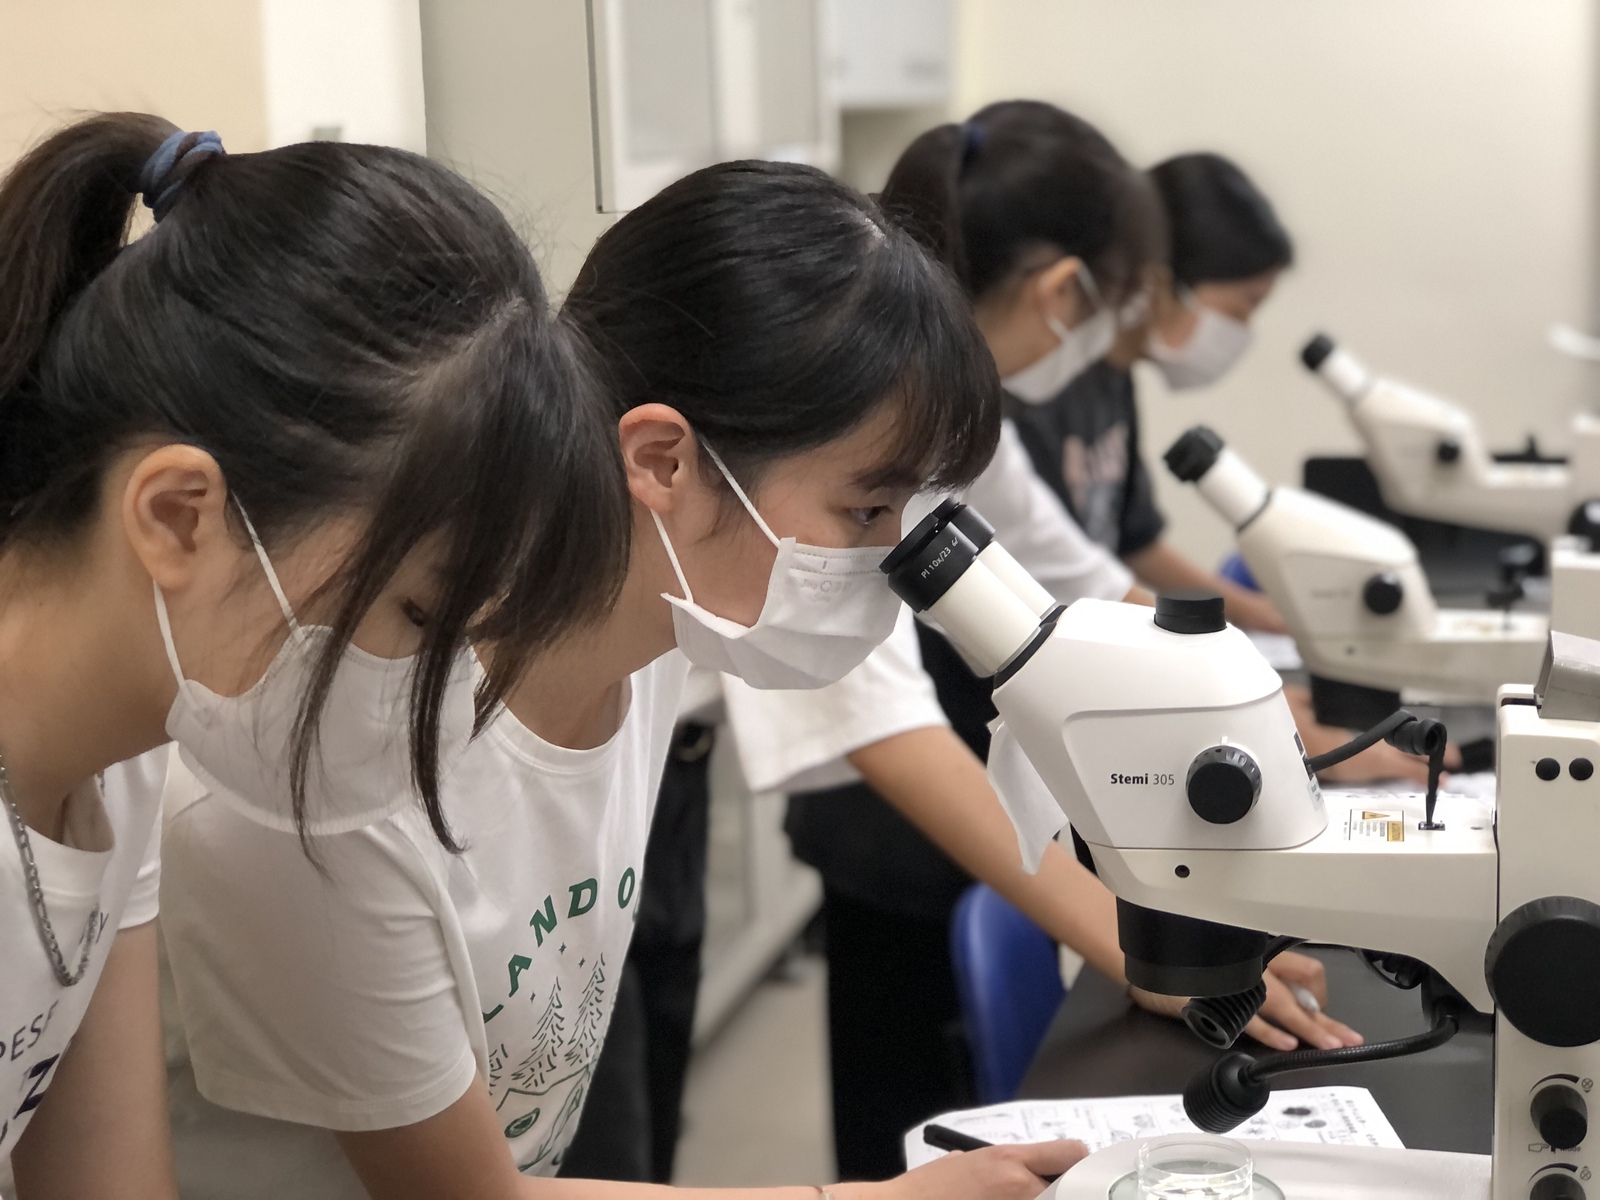 The activity visited the Laboratory of Distinguished Professor Meng-Hsien Chen of the Department of Oceanography to operate optical dissecting microscopes.